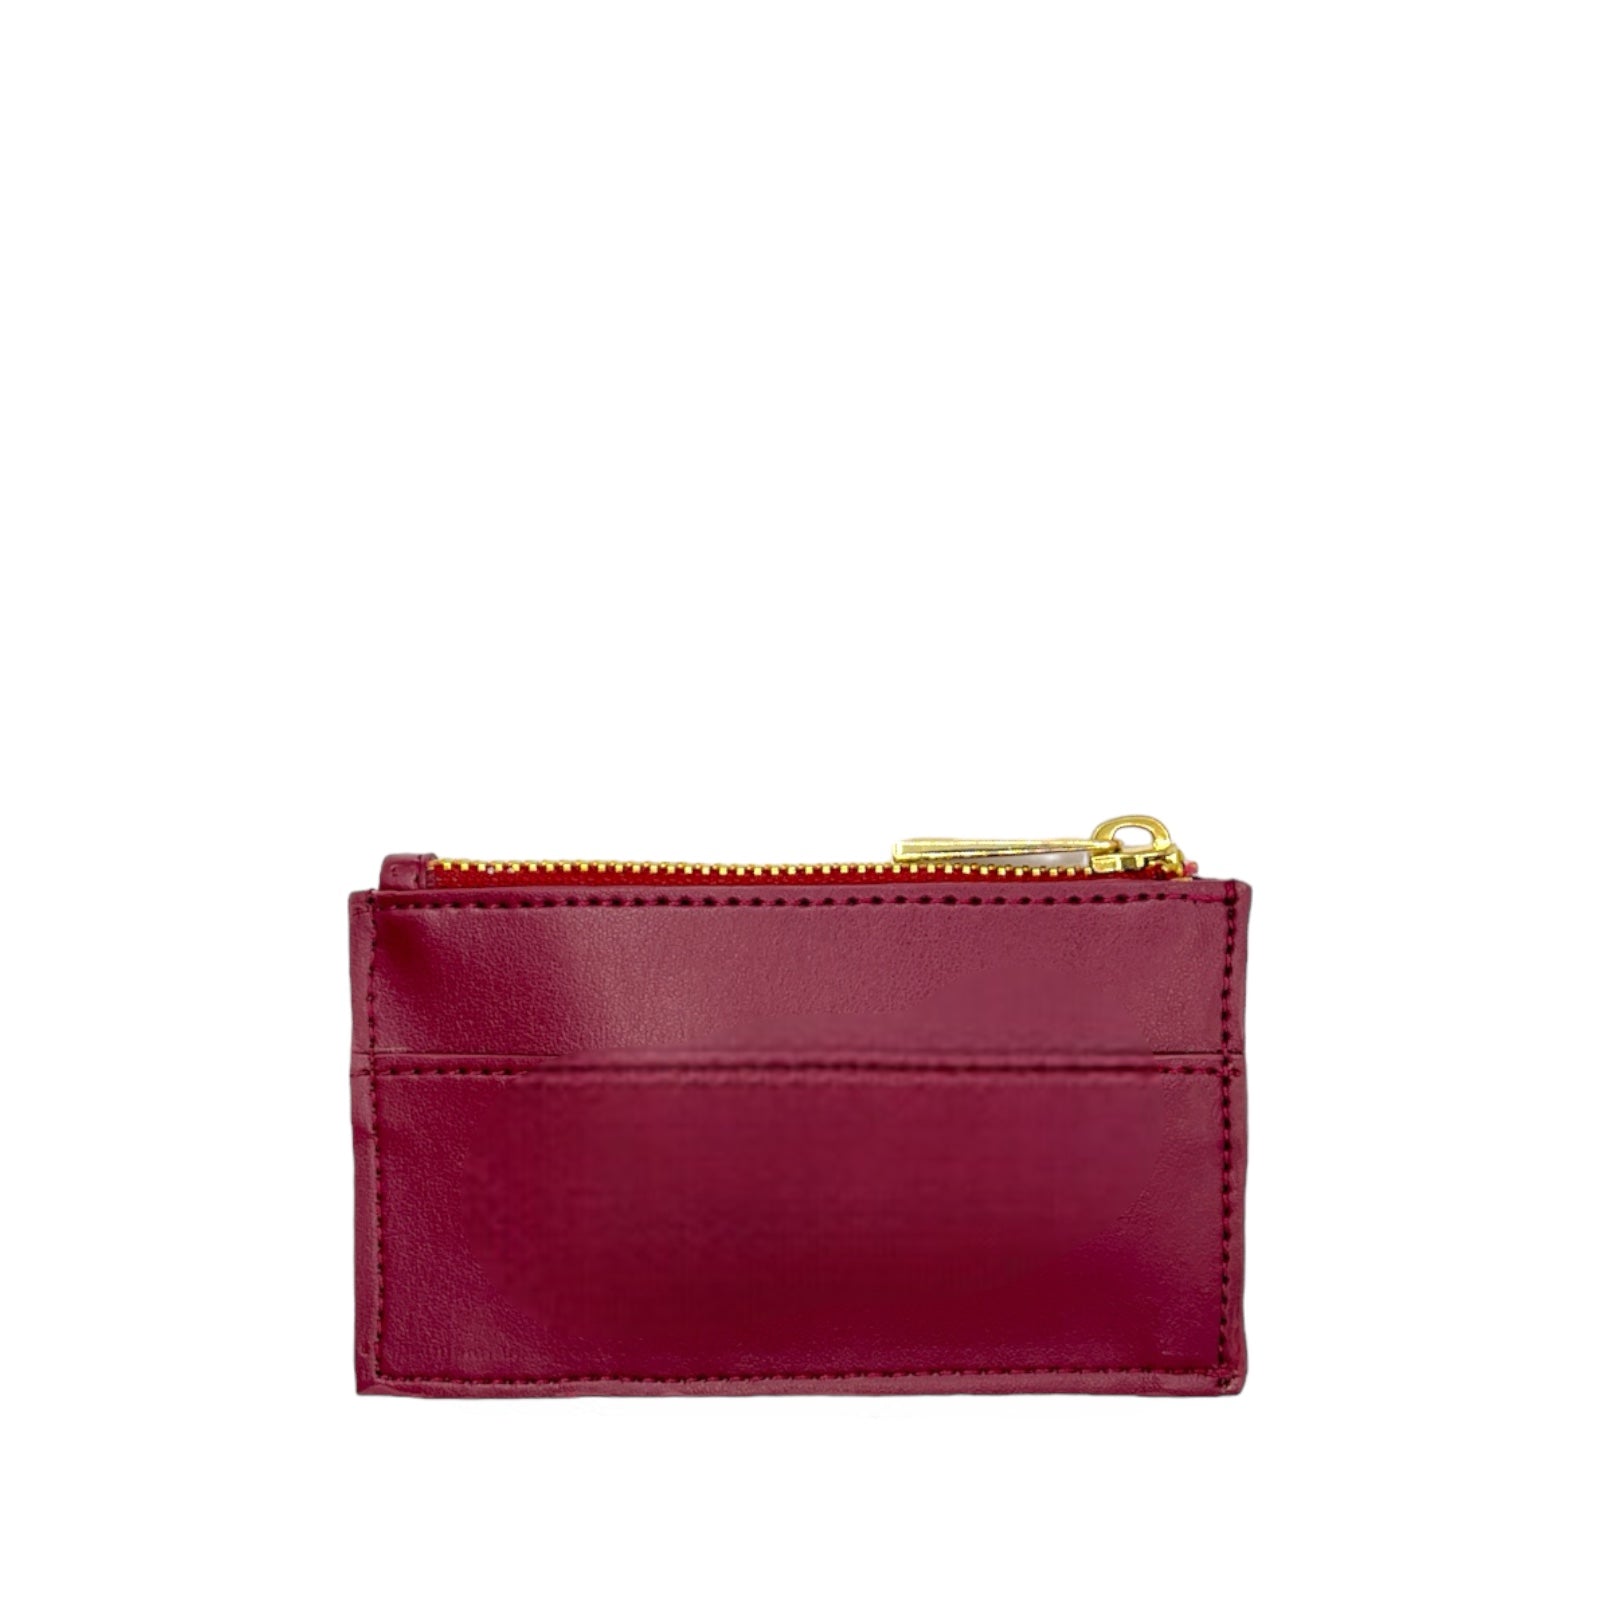 Wine Red Apple leather card holder